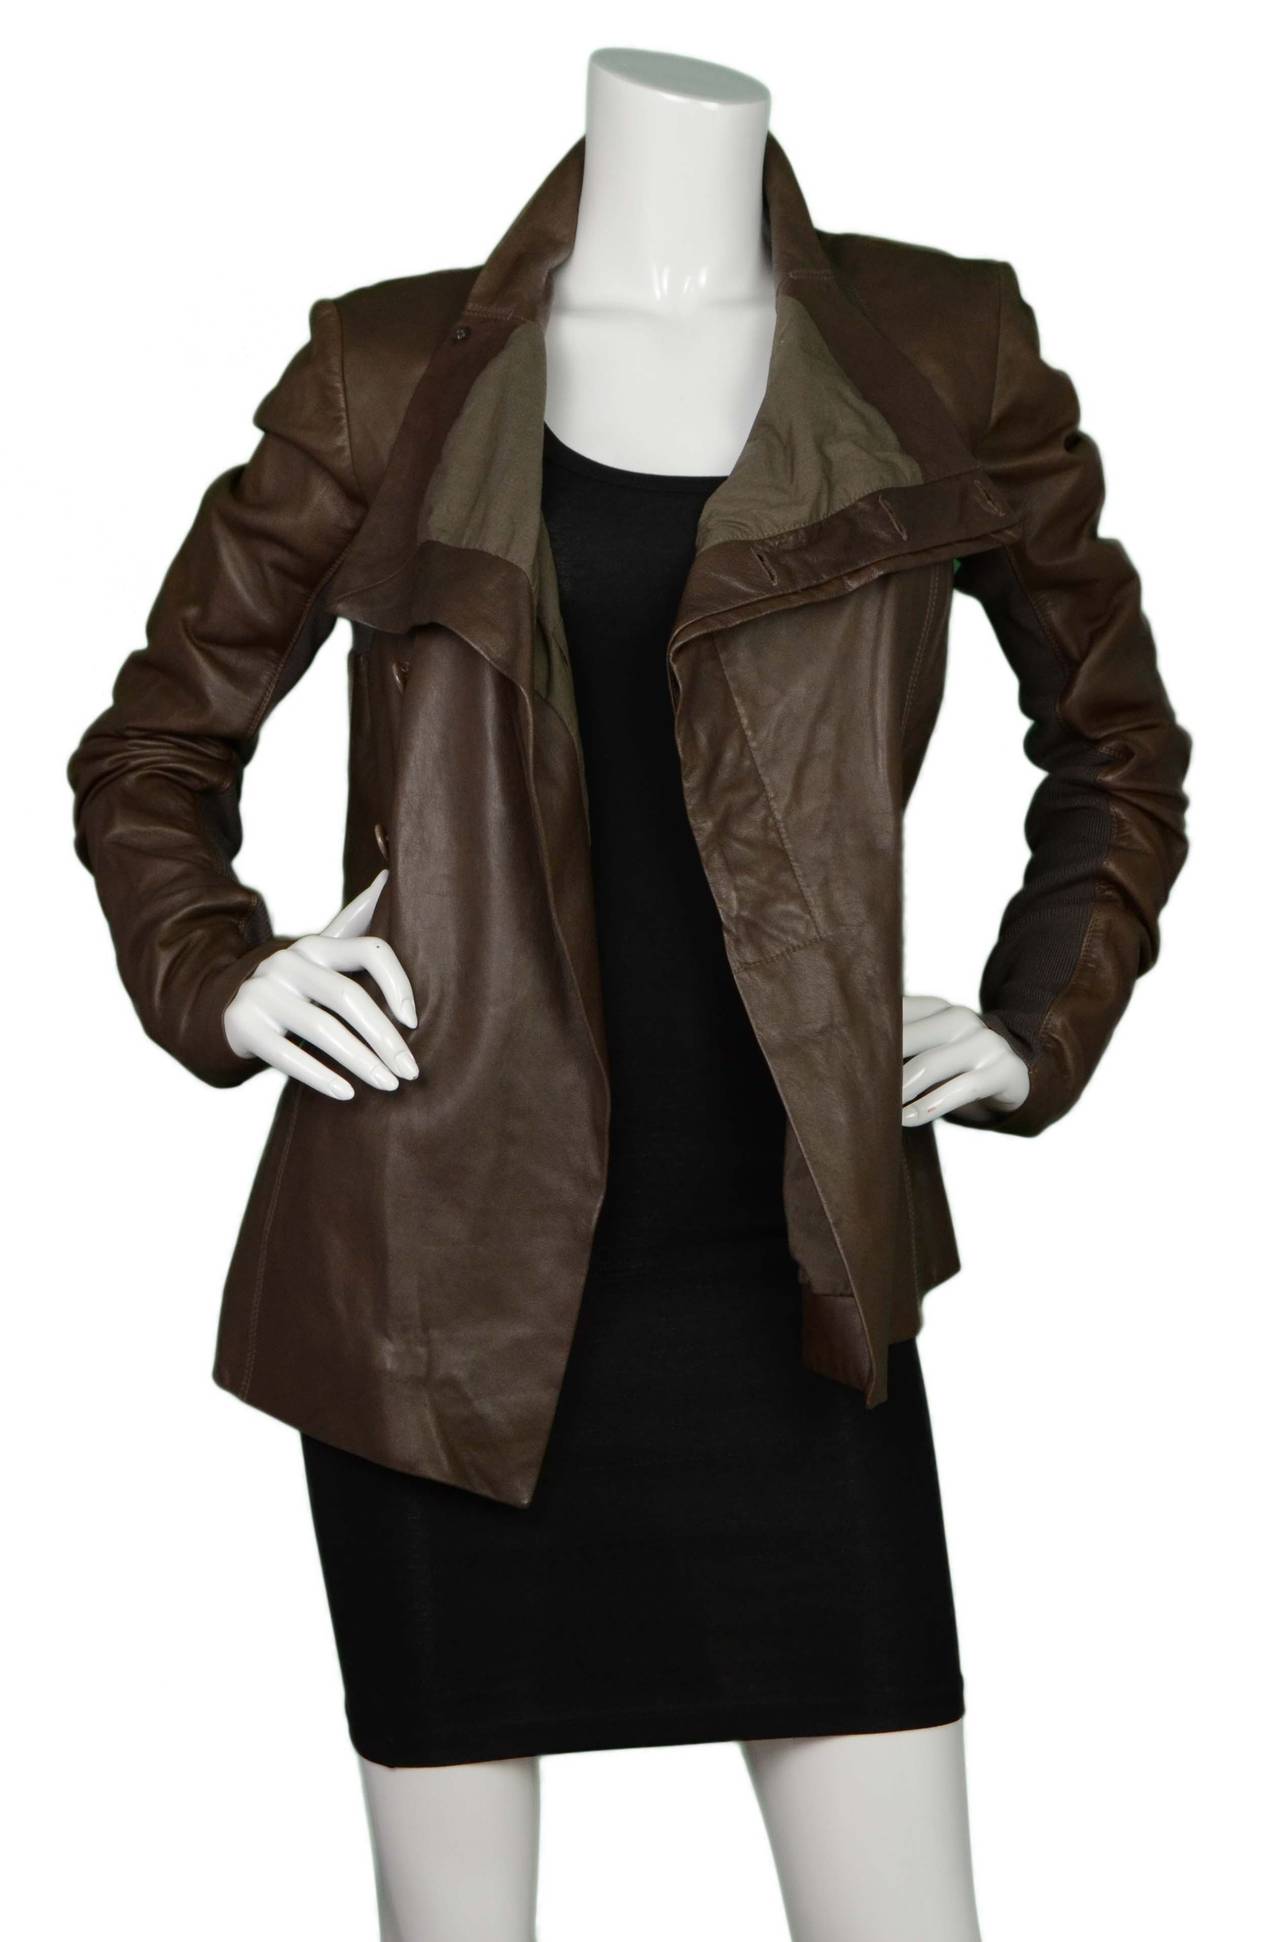 Rick Owens Brown Leather Asymmetrical Leather Jacket
Features ribbed cotton on under side of sleeves
Made In: Italy
Color: Brown
Composition: 100% Leather & 100% rayon
Lining: Brown, 100% cotton
Closure/Opening: Button up
Exterior Pockets: